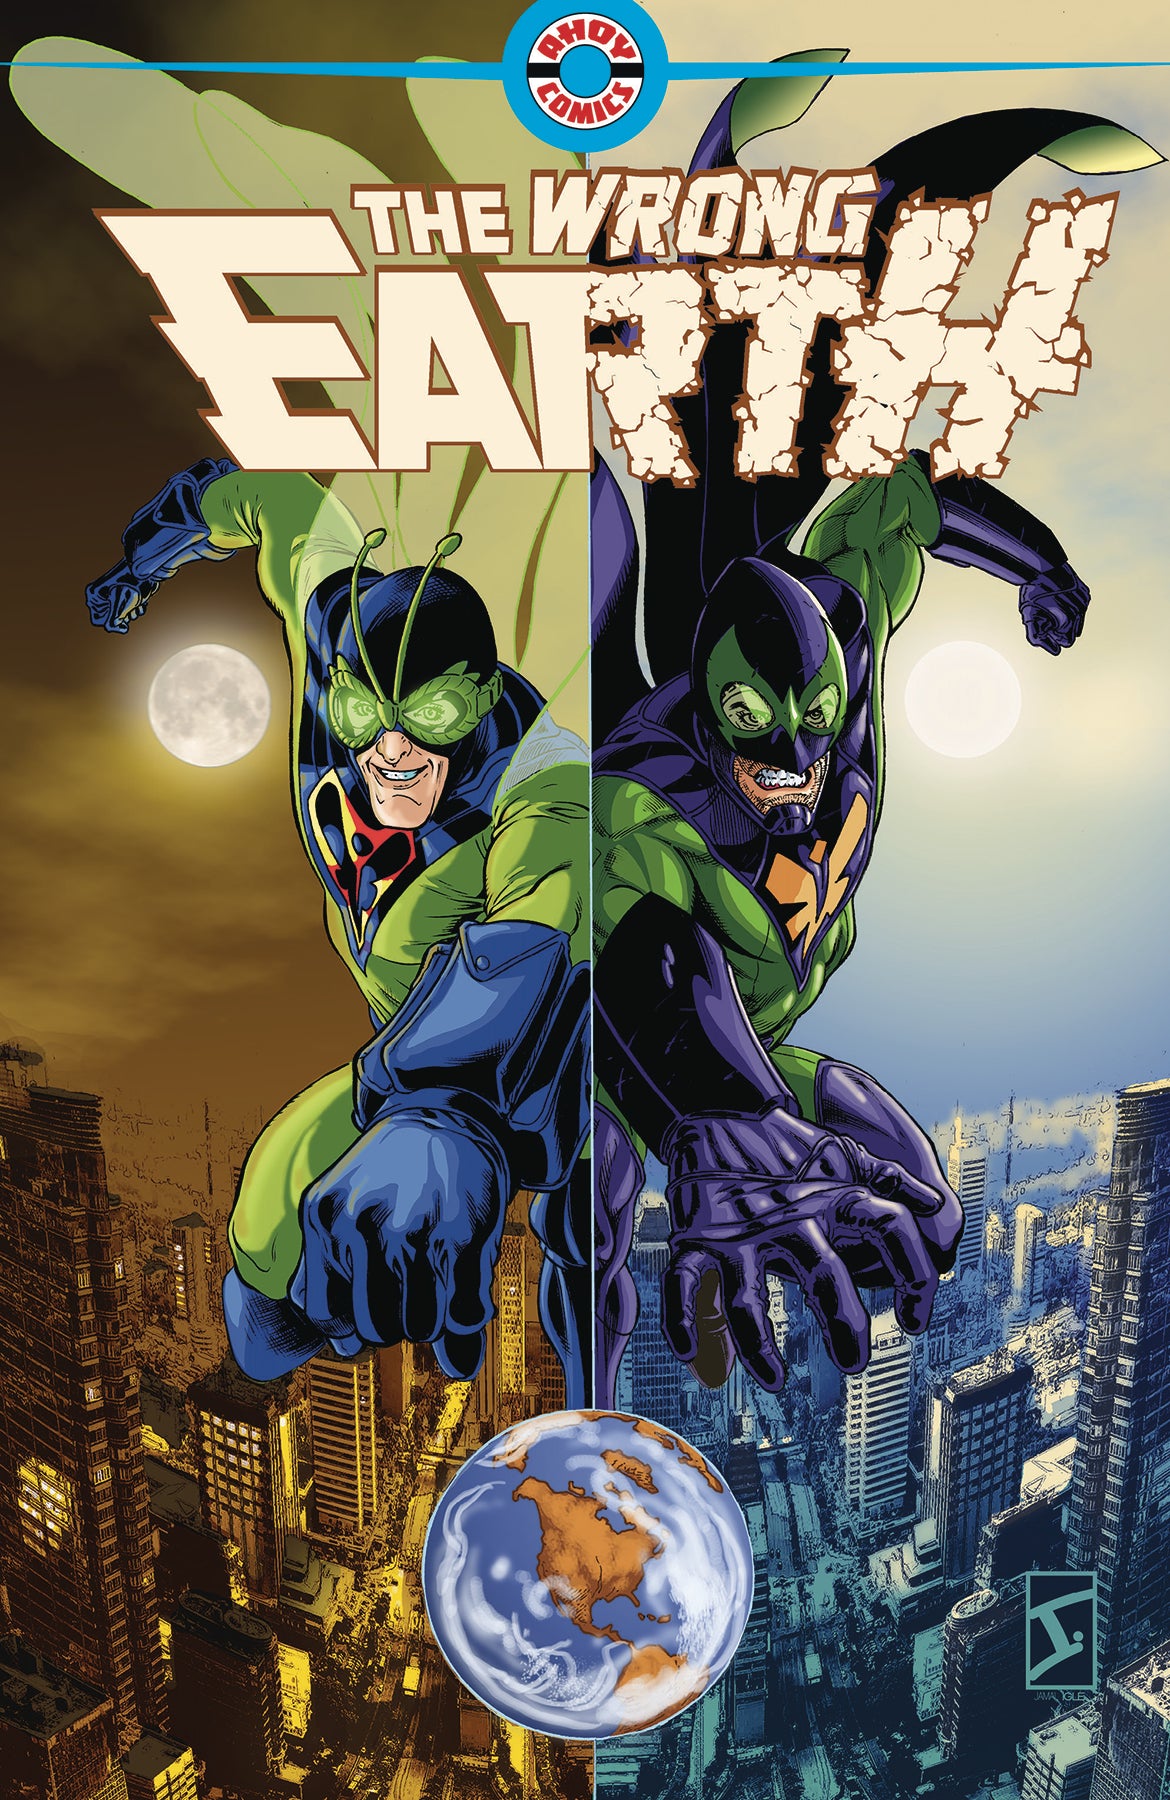 WRONG EARTH #1 COVER